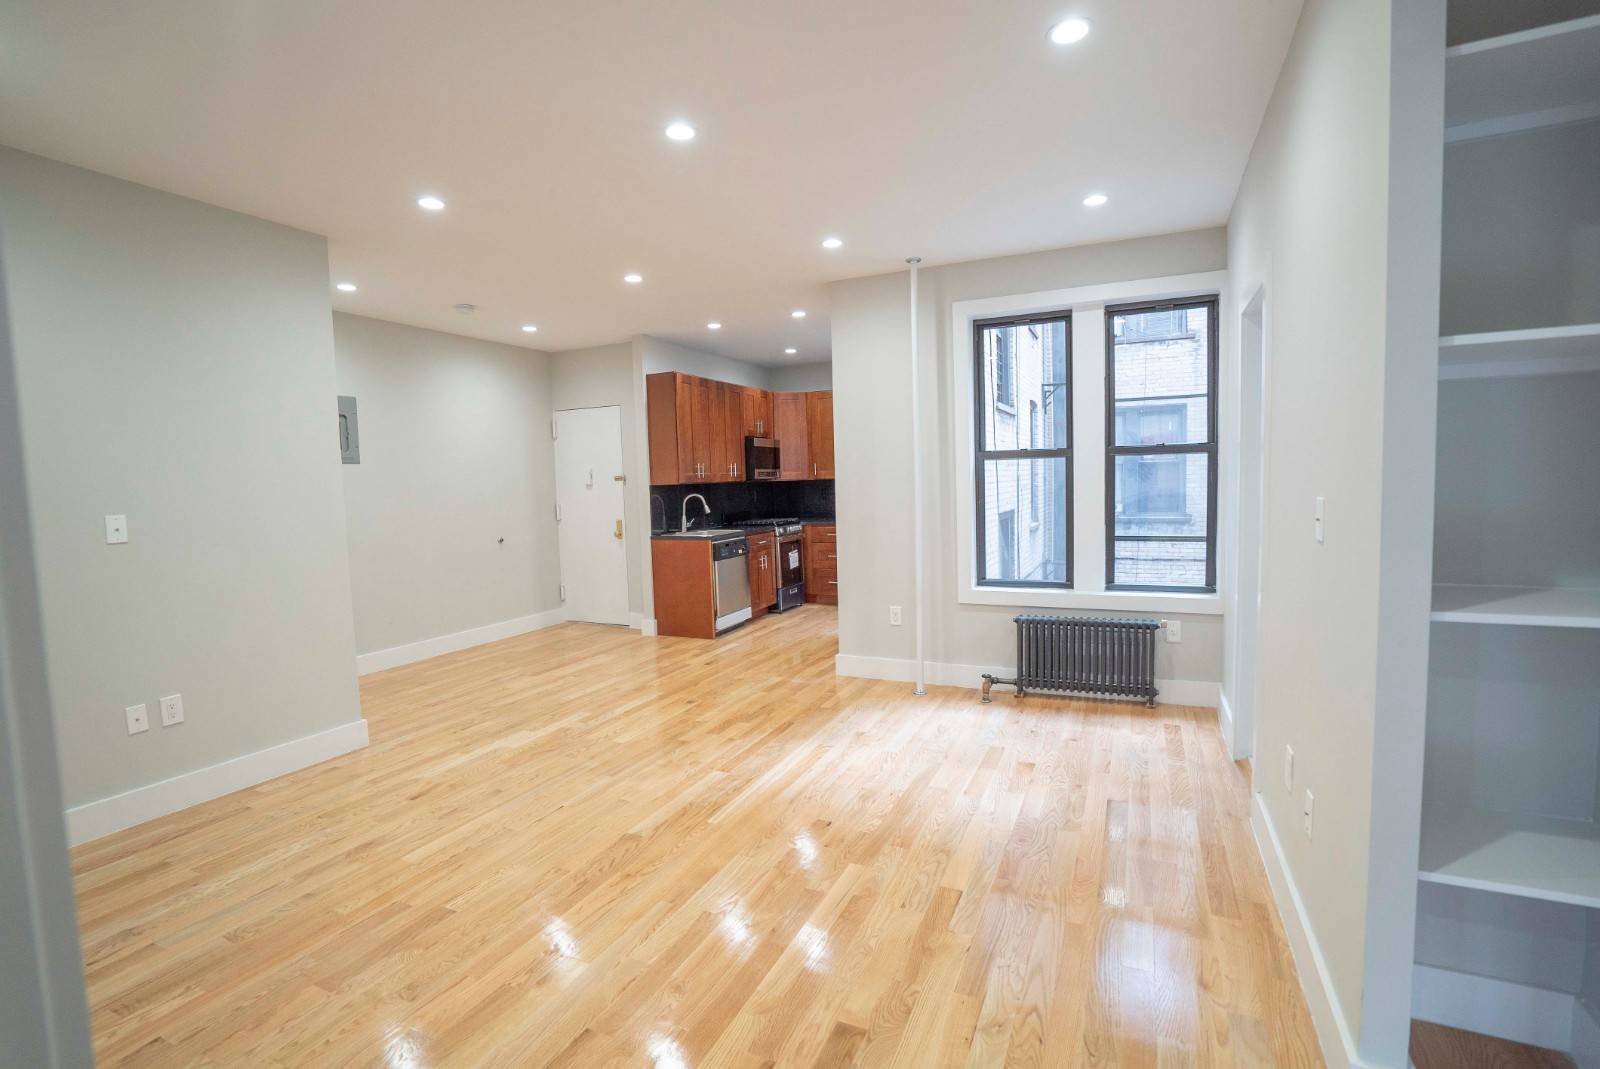 APARTMENT FEATURES Fully gut renovated just one year ago Washer and dryer in the apartment High end finishes throughout Granite counters and stainless appliances in the kitchen including dishwasher and ...